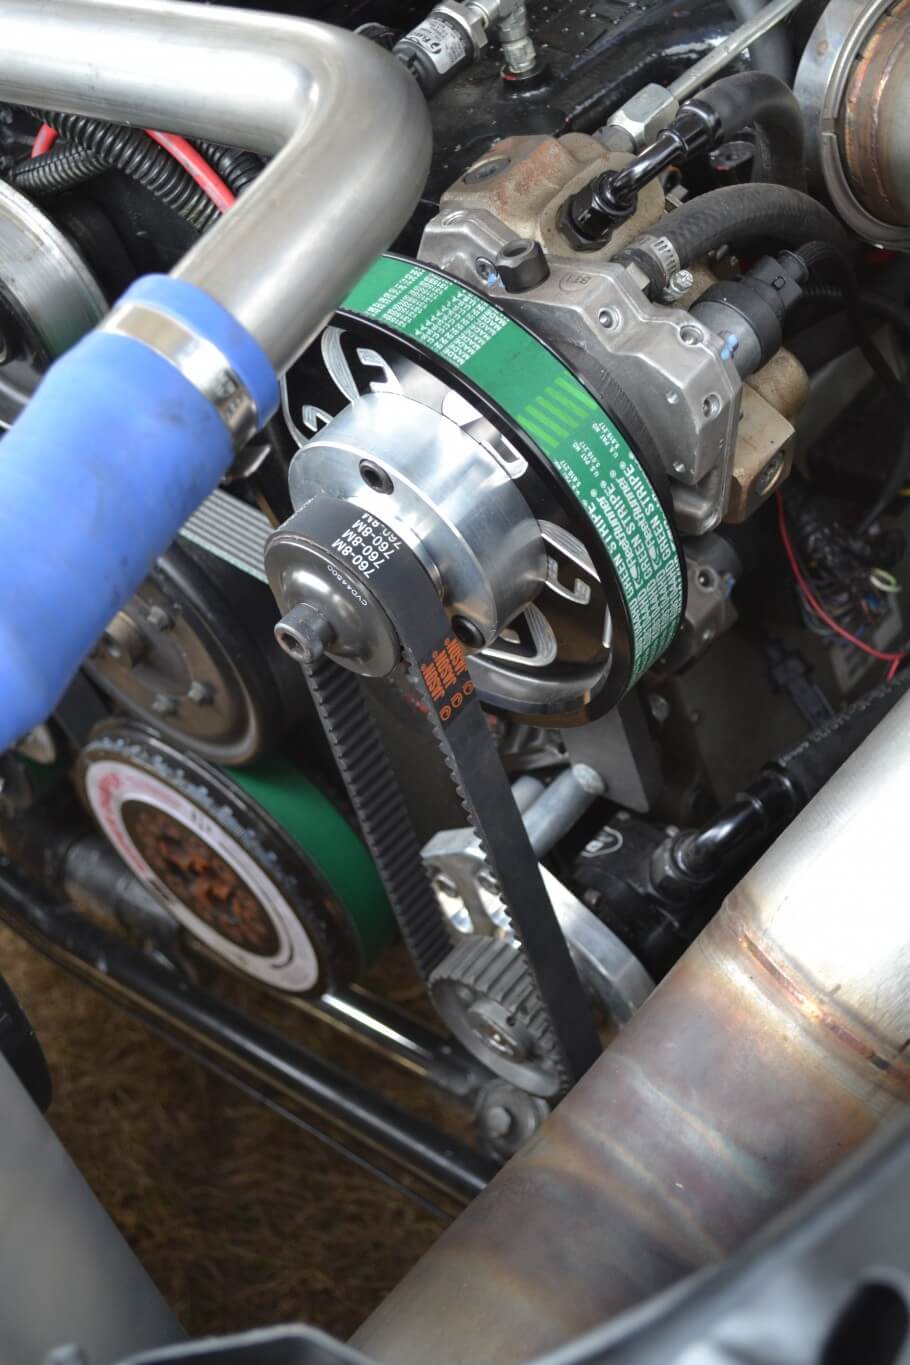 The fuel system on Ben's drag truck is quite a sight. The lift pump flows an incredible 6 gallons per minute (360 gph!) and is driven off the FPE dual CP3 drive. The upper CP3 is a FPE Powerflow 750, as is the lower CP3. Both pumps send fuel to mammoth 450-percent over injectors from S&S Diesel Motorsports.